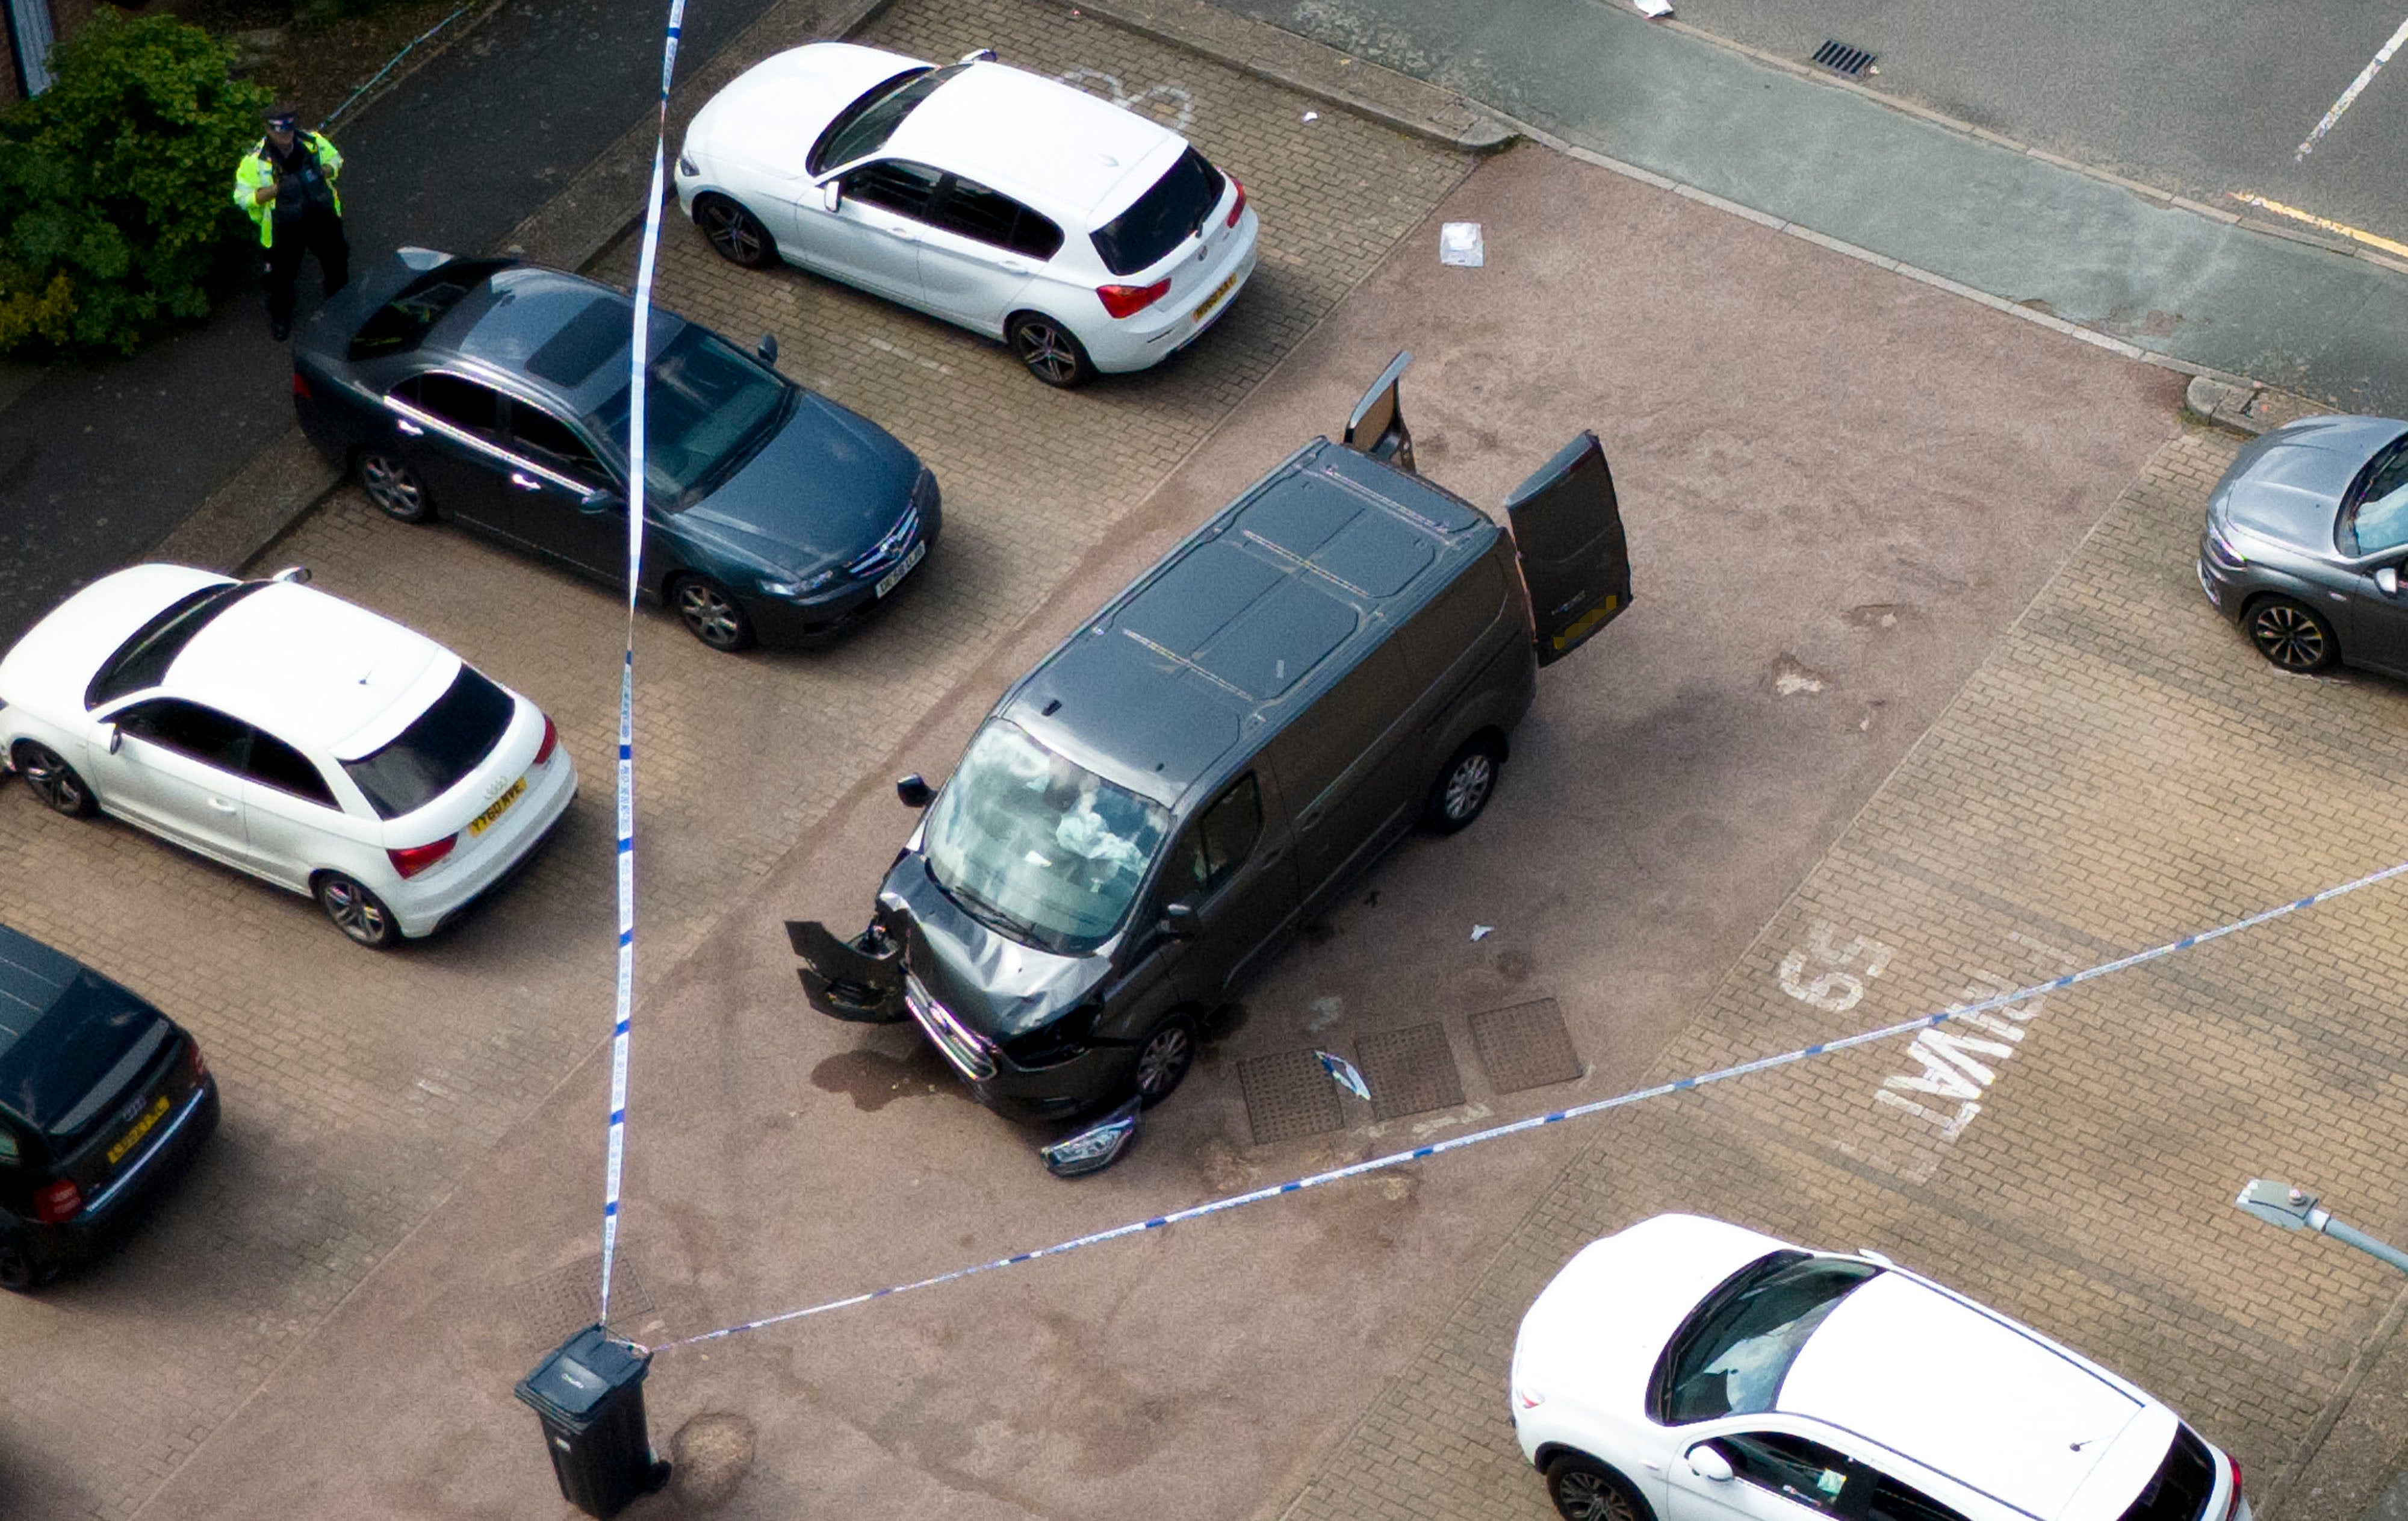 The damaged van at the scene of the tragic incident in east London